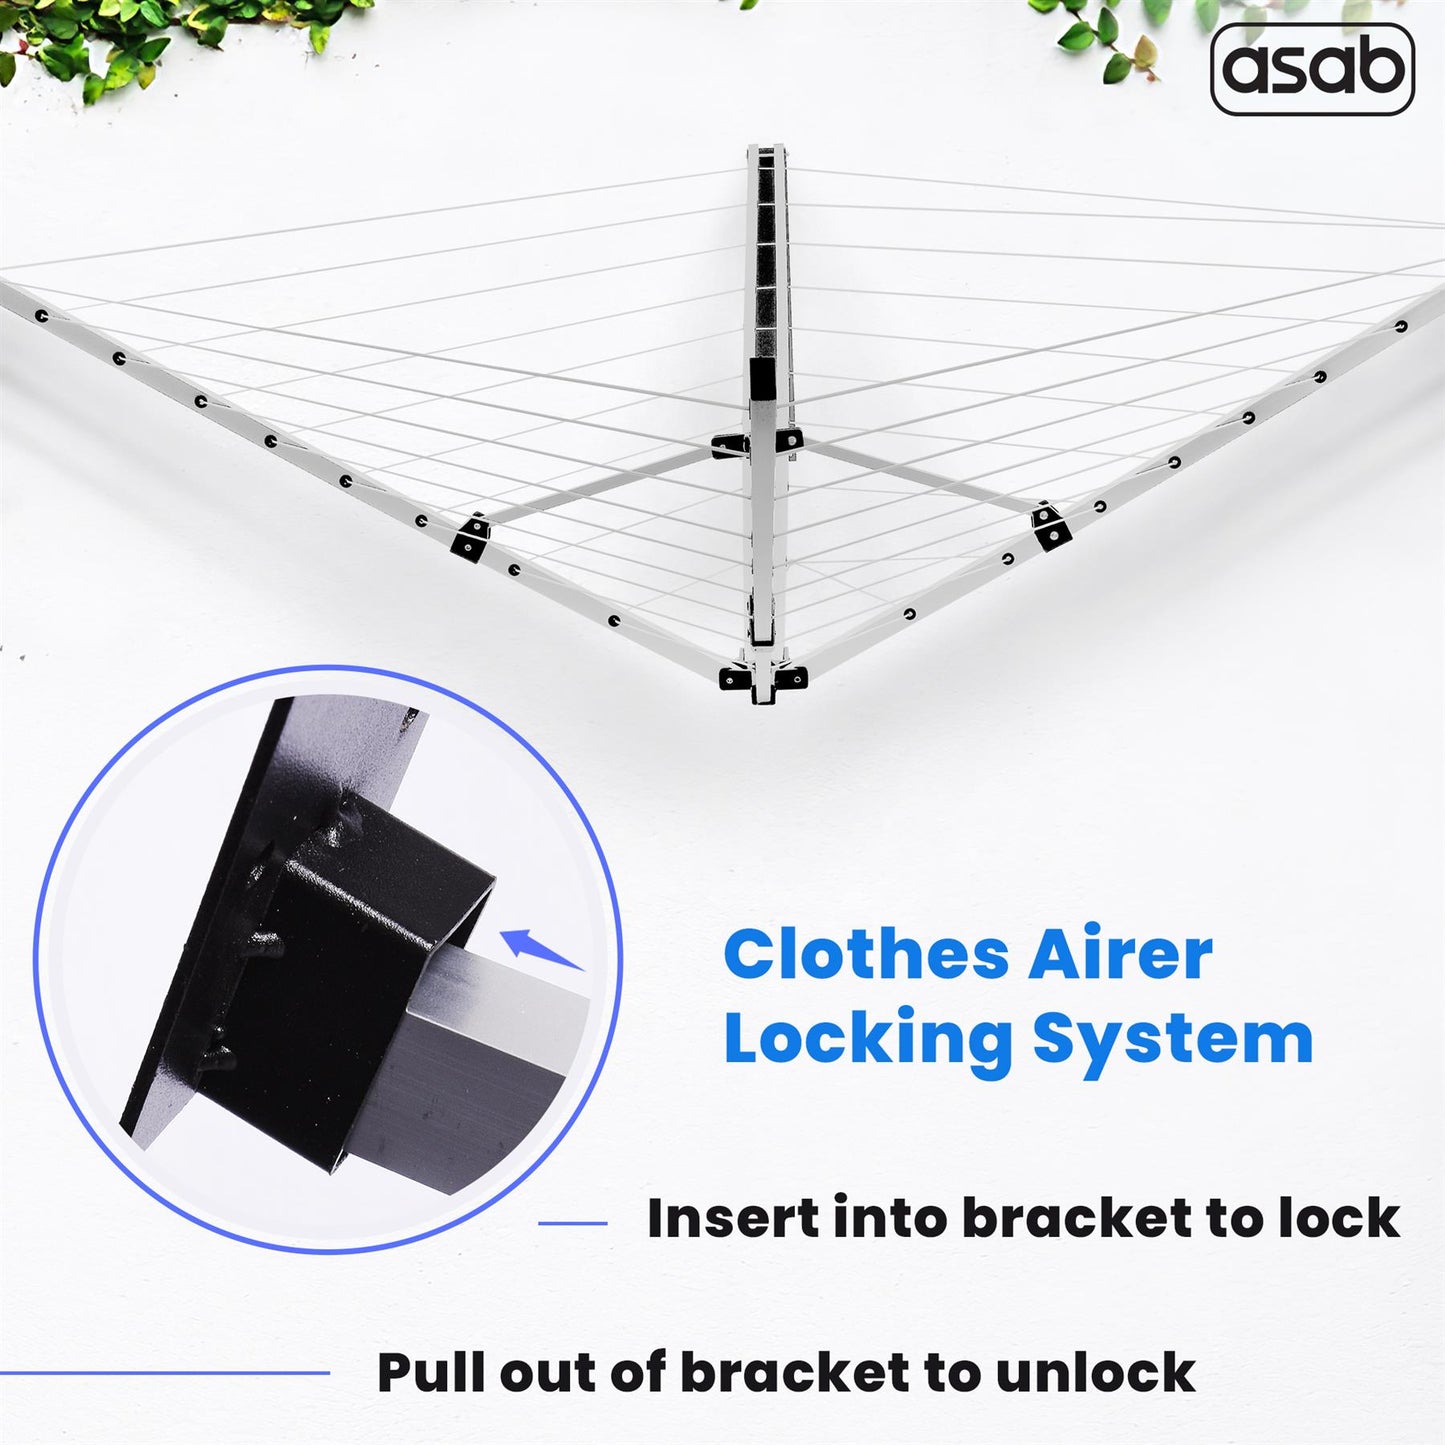 5-Arm Folding Laundry Drying Rack For Indoor & Outdoor Use